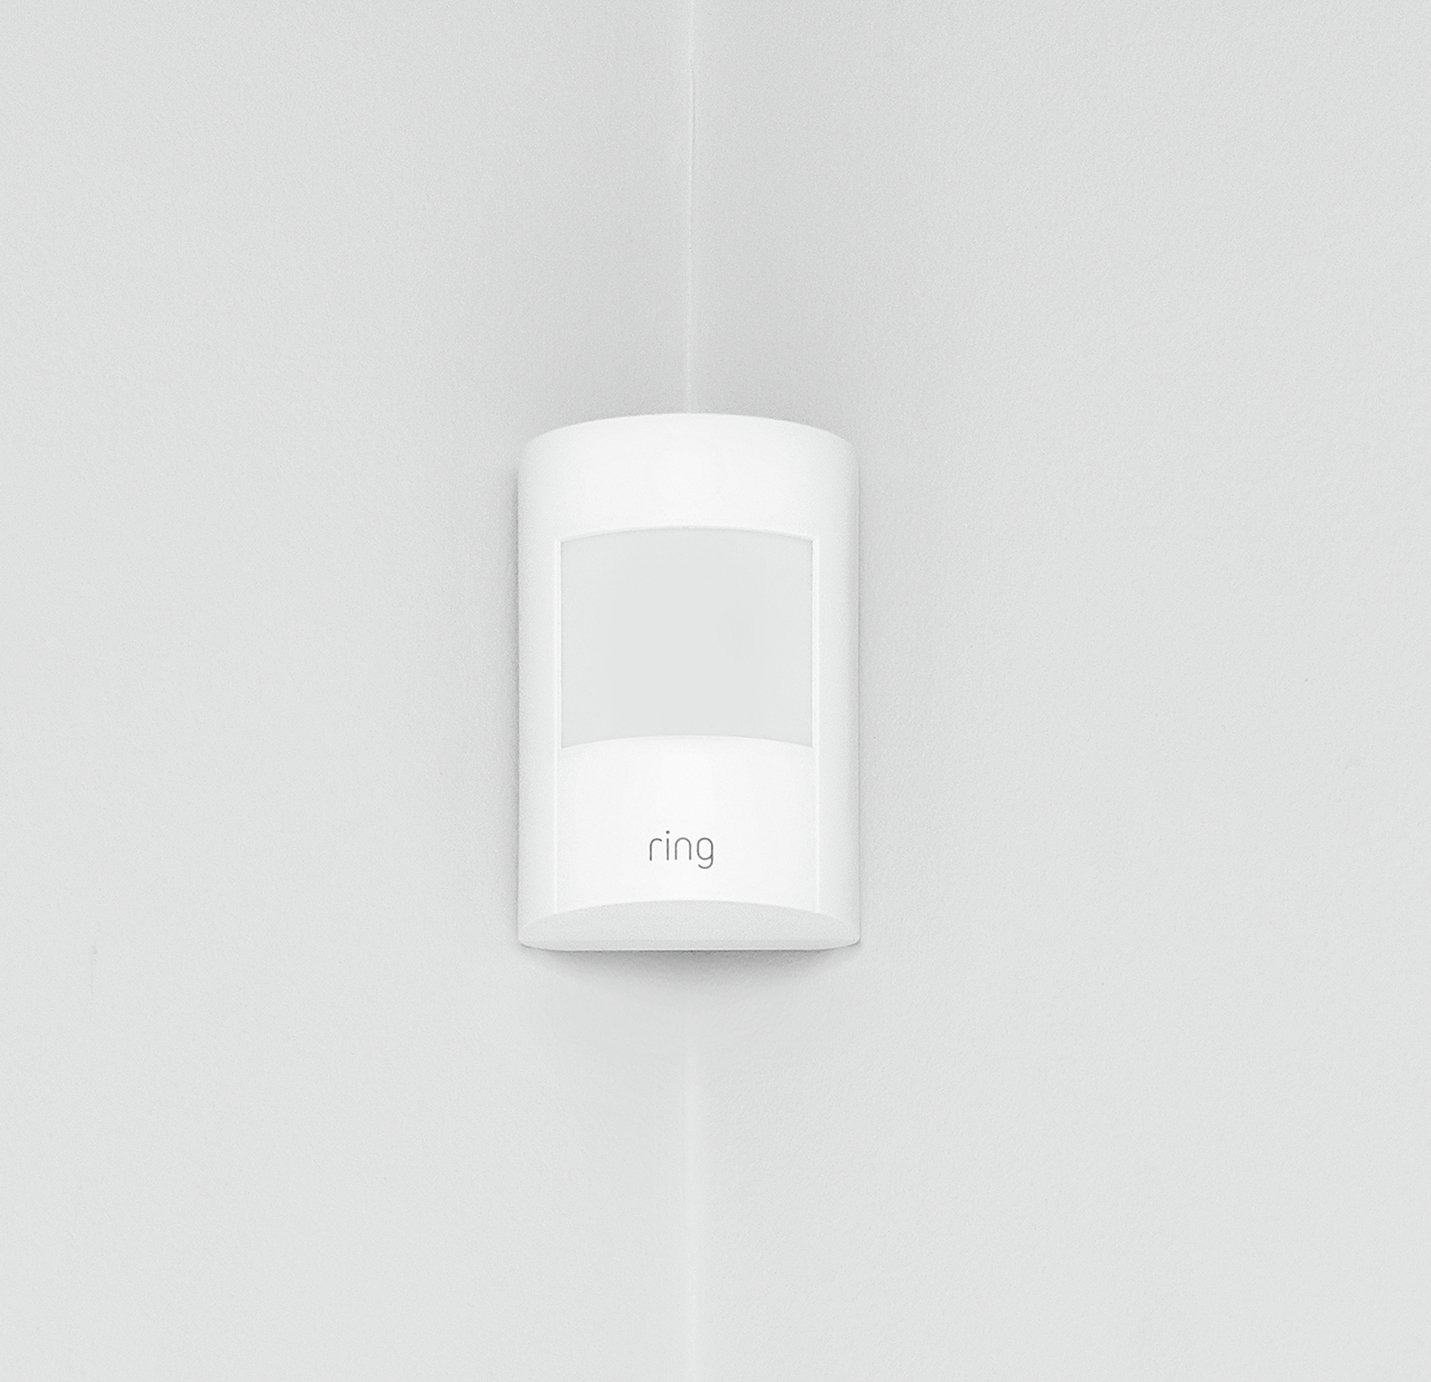 Ring Alarm Motion Detector Review